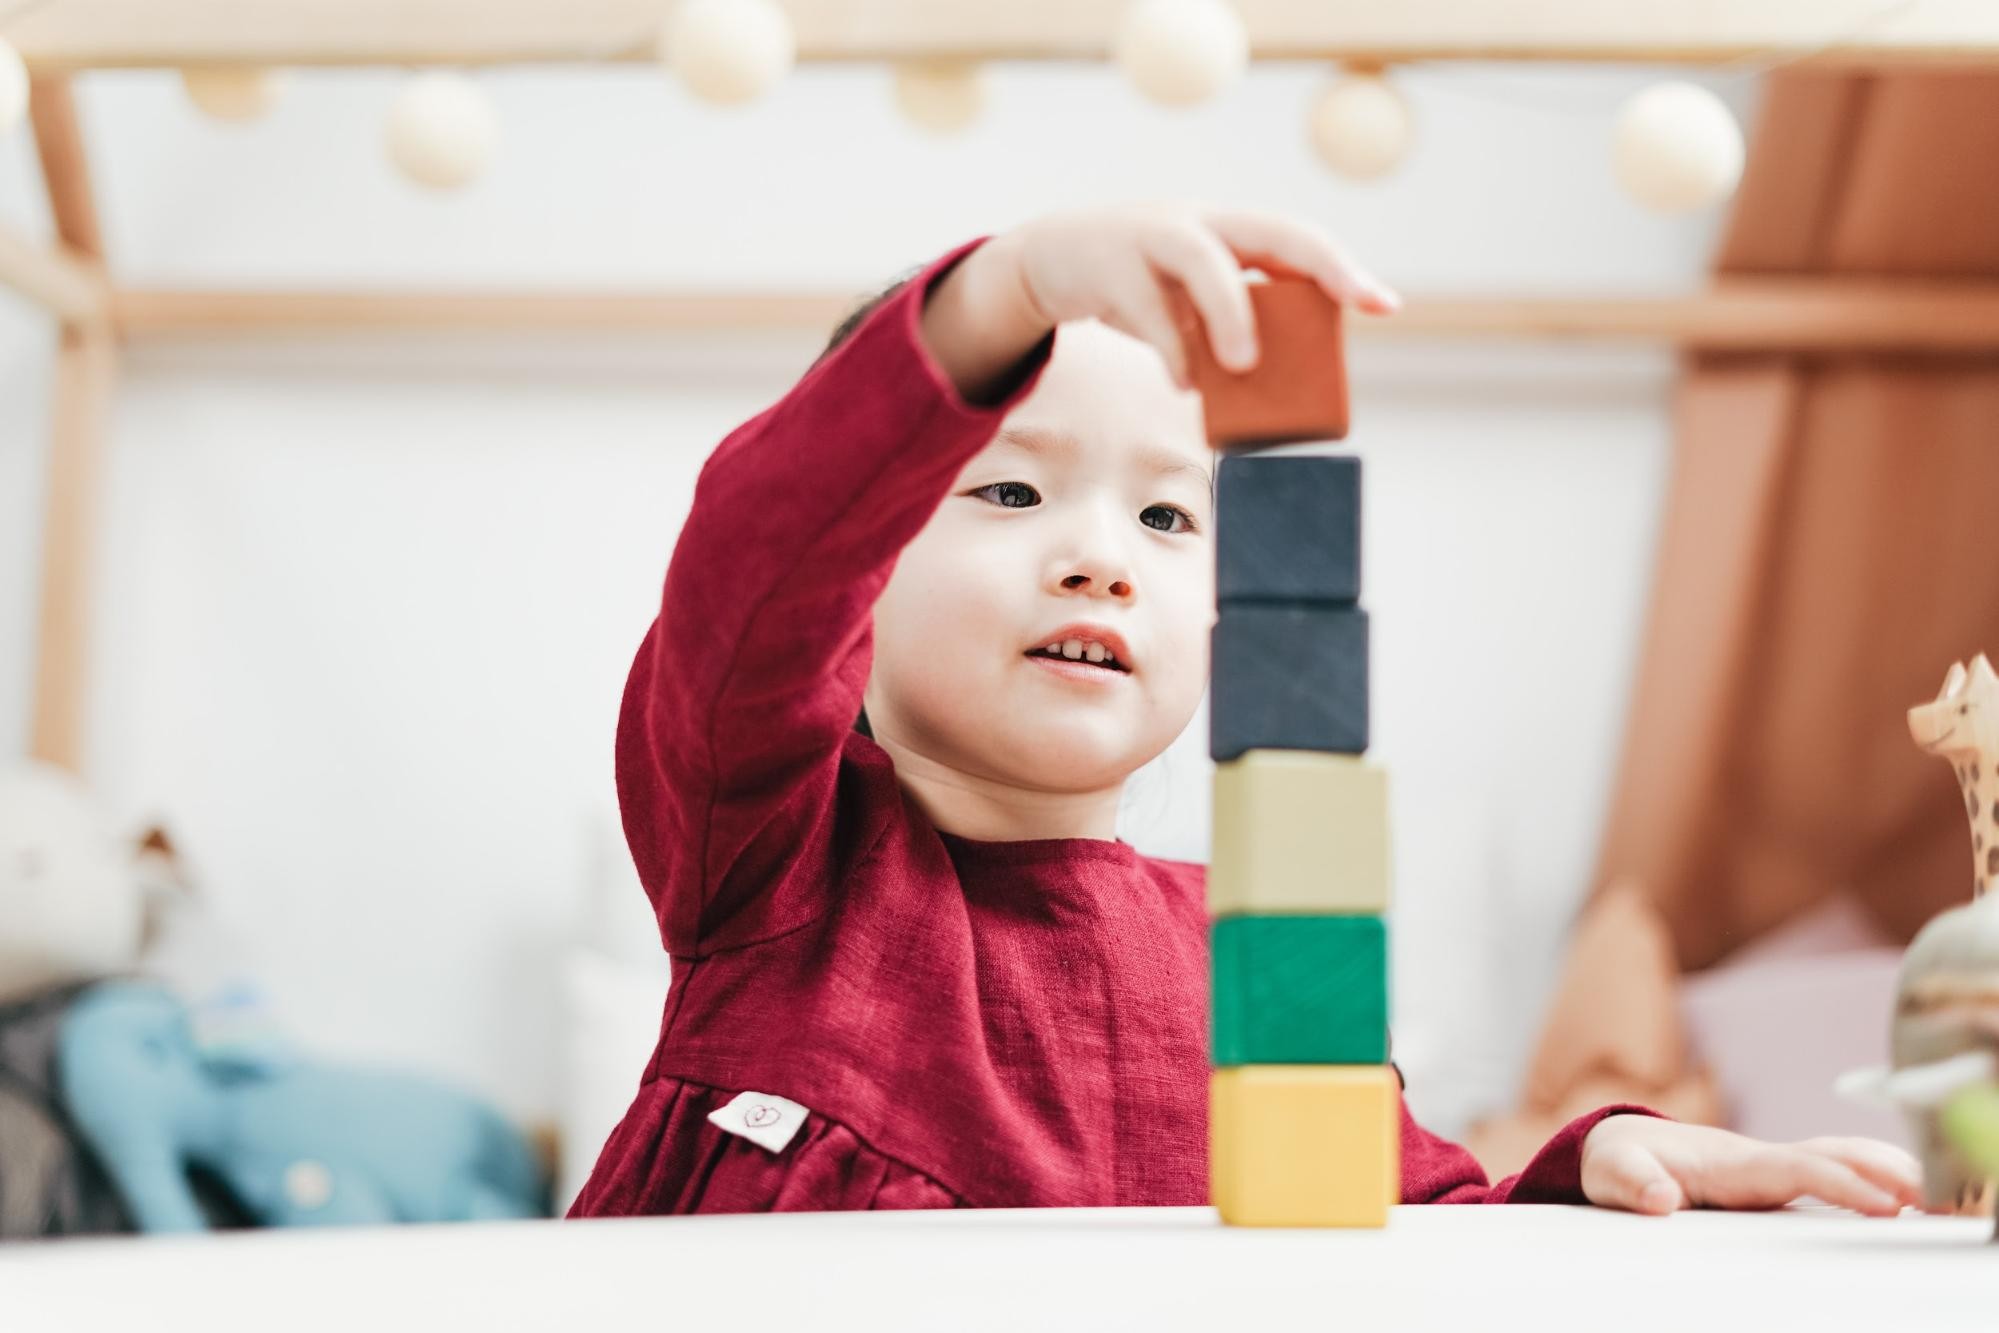 Young child plays with building blocks in the classroom.